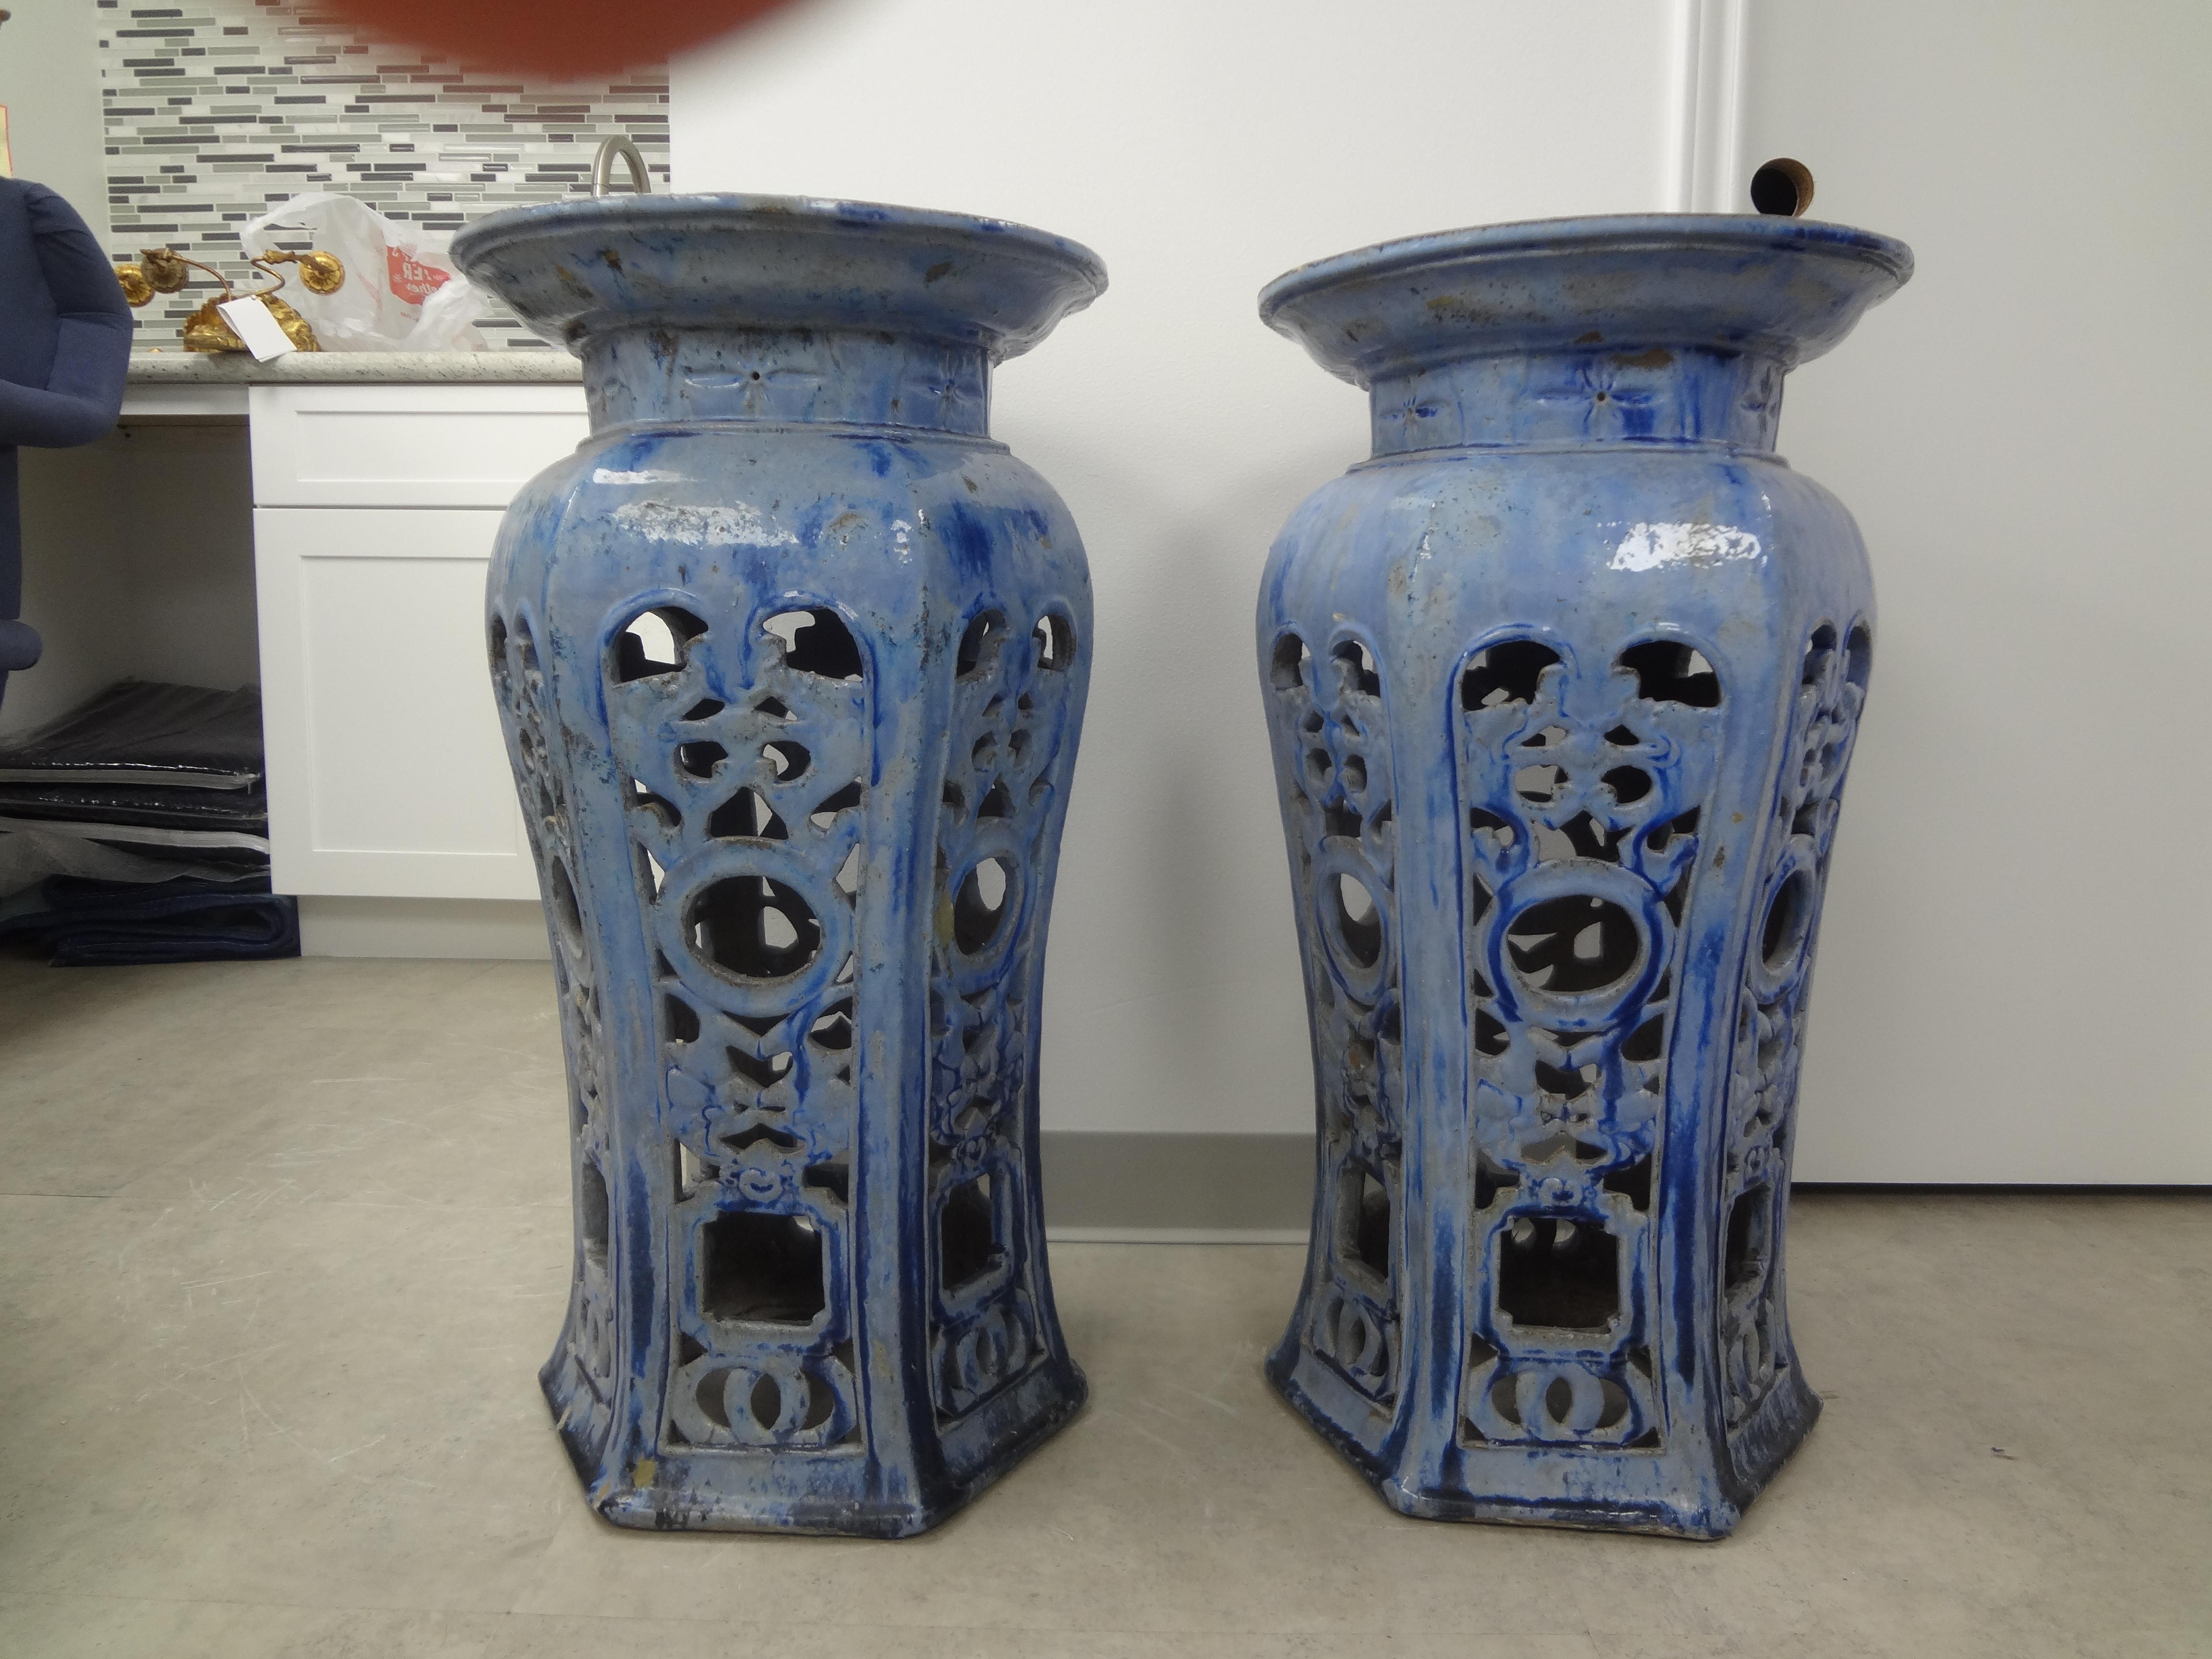 Pair of early 20th century Chinese glazed terra cotta pedestals or stands. These stunning antique Chinese pedestals are executed in an interesting cornflower blue and are perfect for displaying your prized urns or jardinieres. Although antique, this